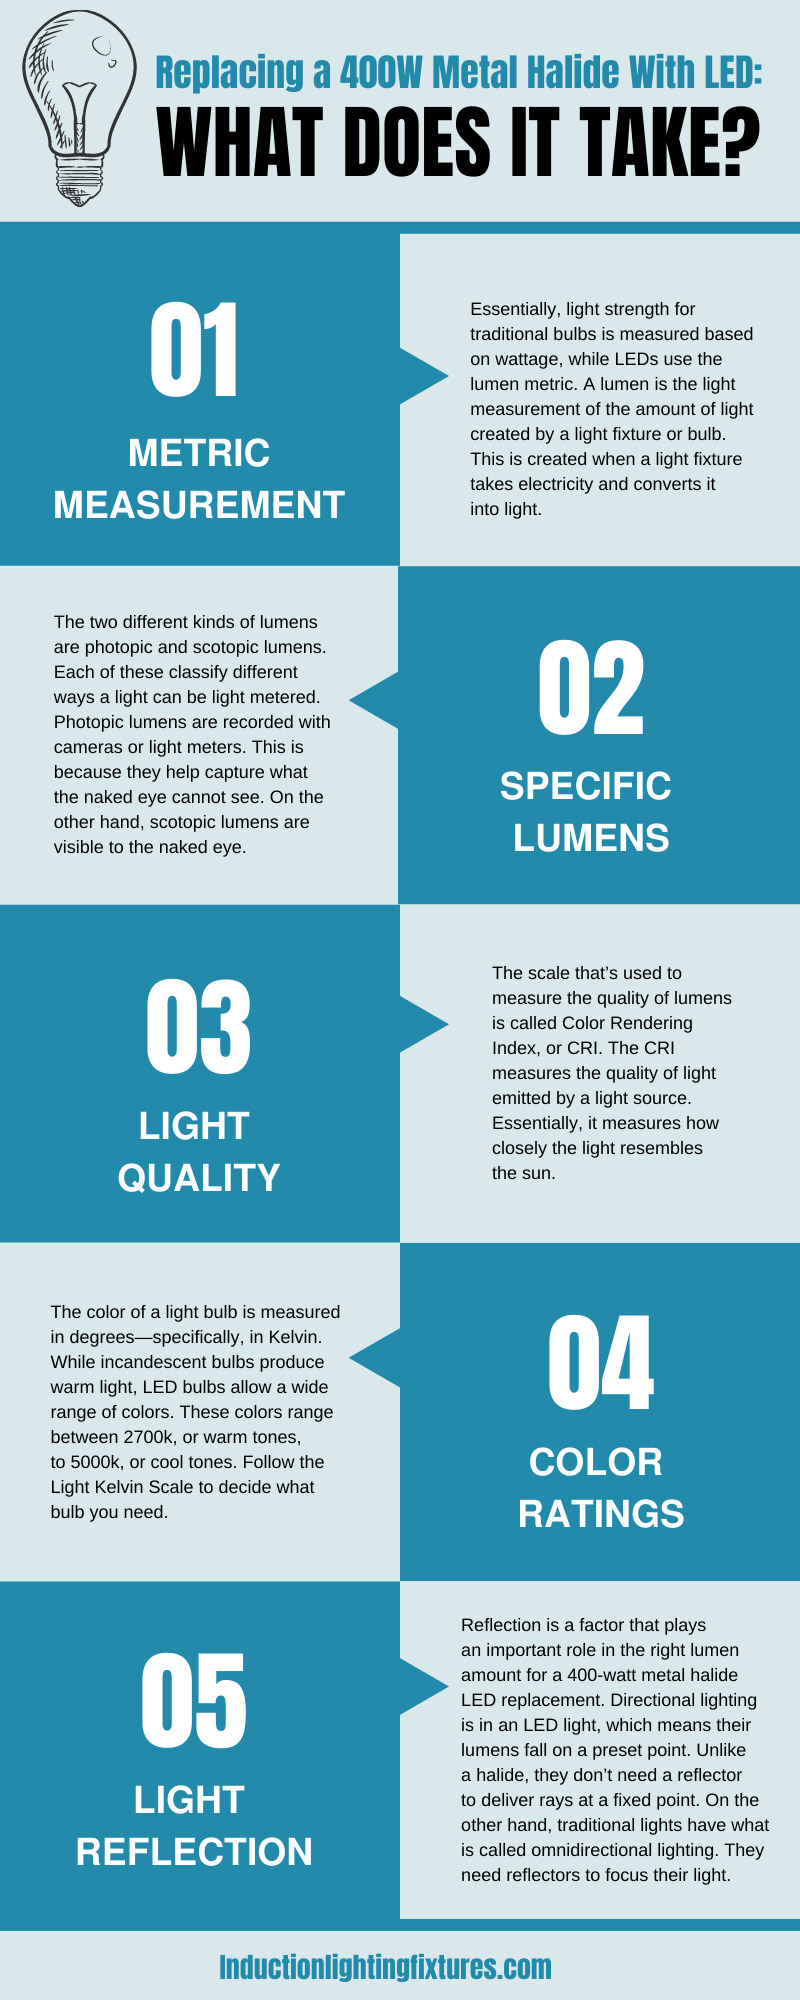 Replacing a 400W Metal Halide With LED: What Does It Take?